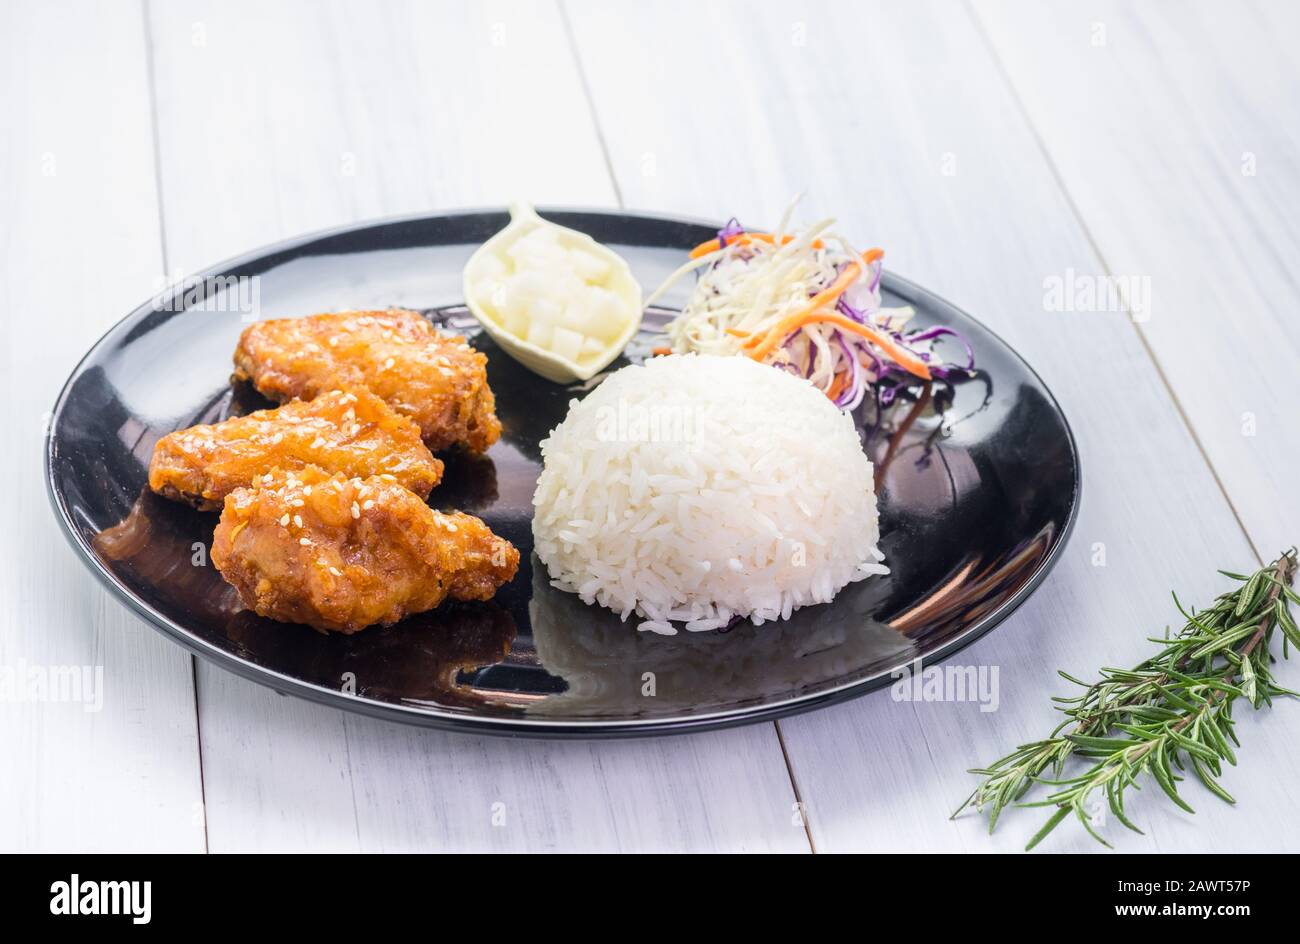 rice,fried chicken wing and salad on tablecloth on white wood table in kitchen,food menu meal. Stock Photo